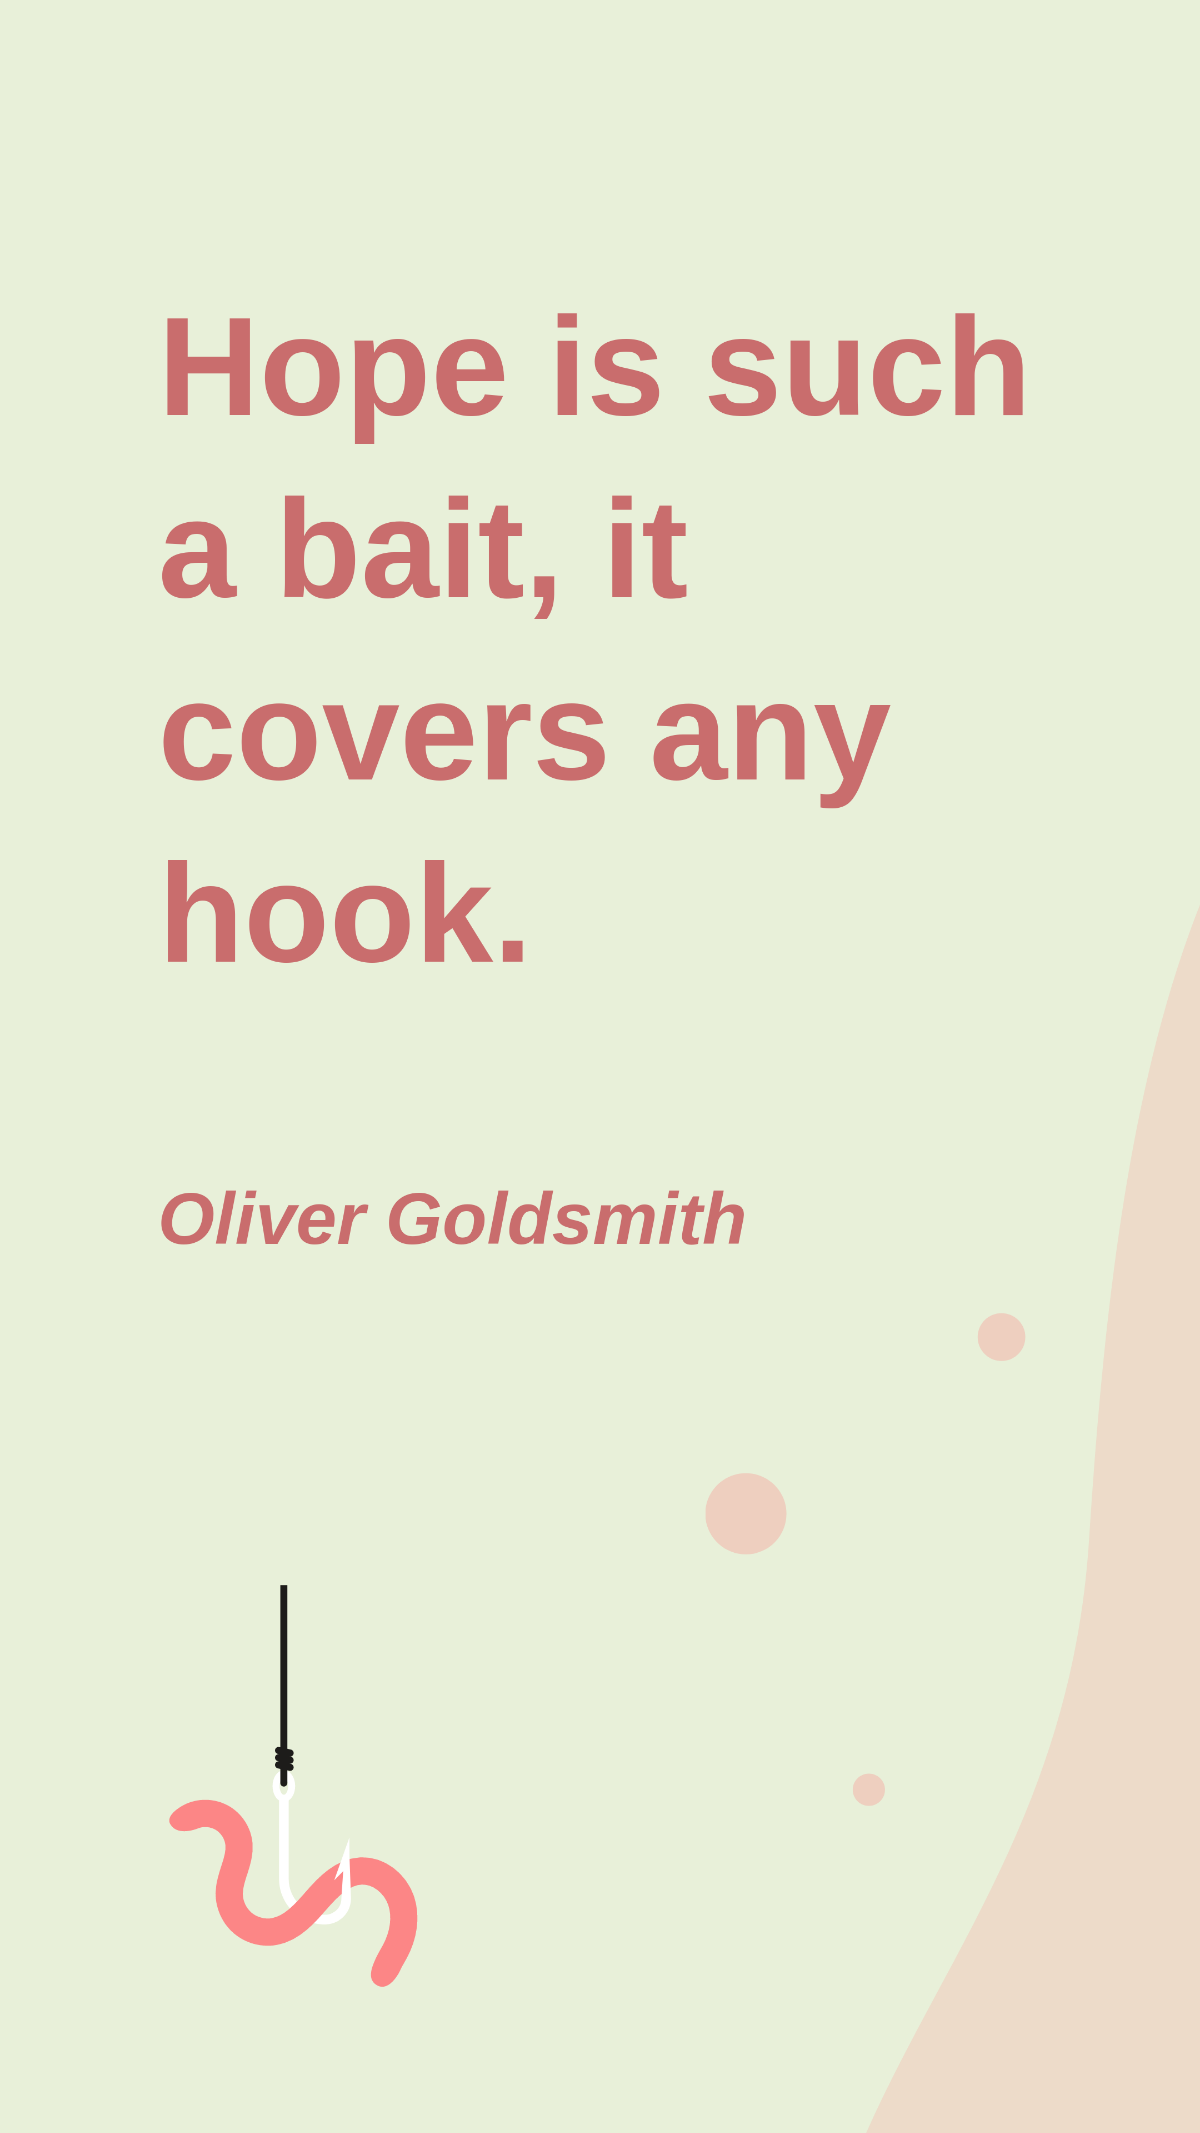 Free Oliver Goldsmith - Hope is such a bait, it covers any hook. Template